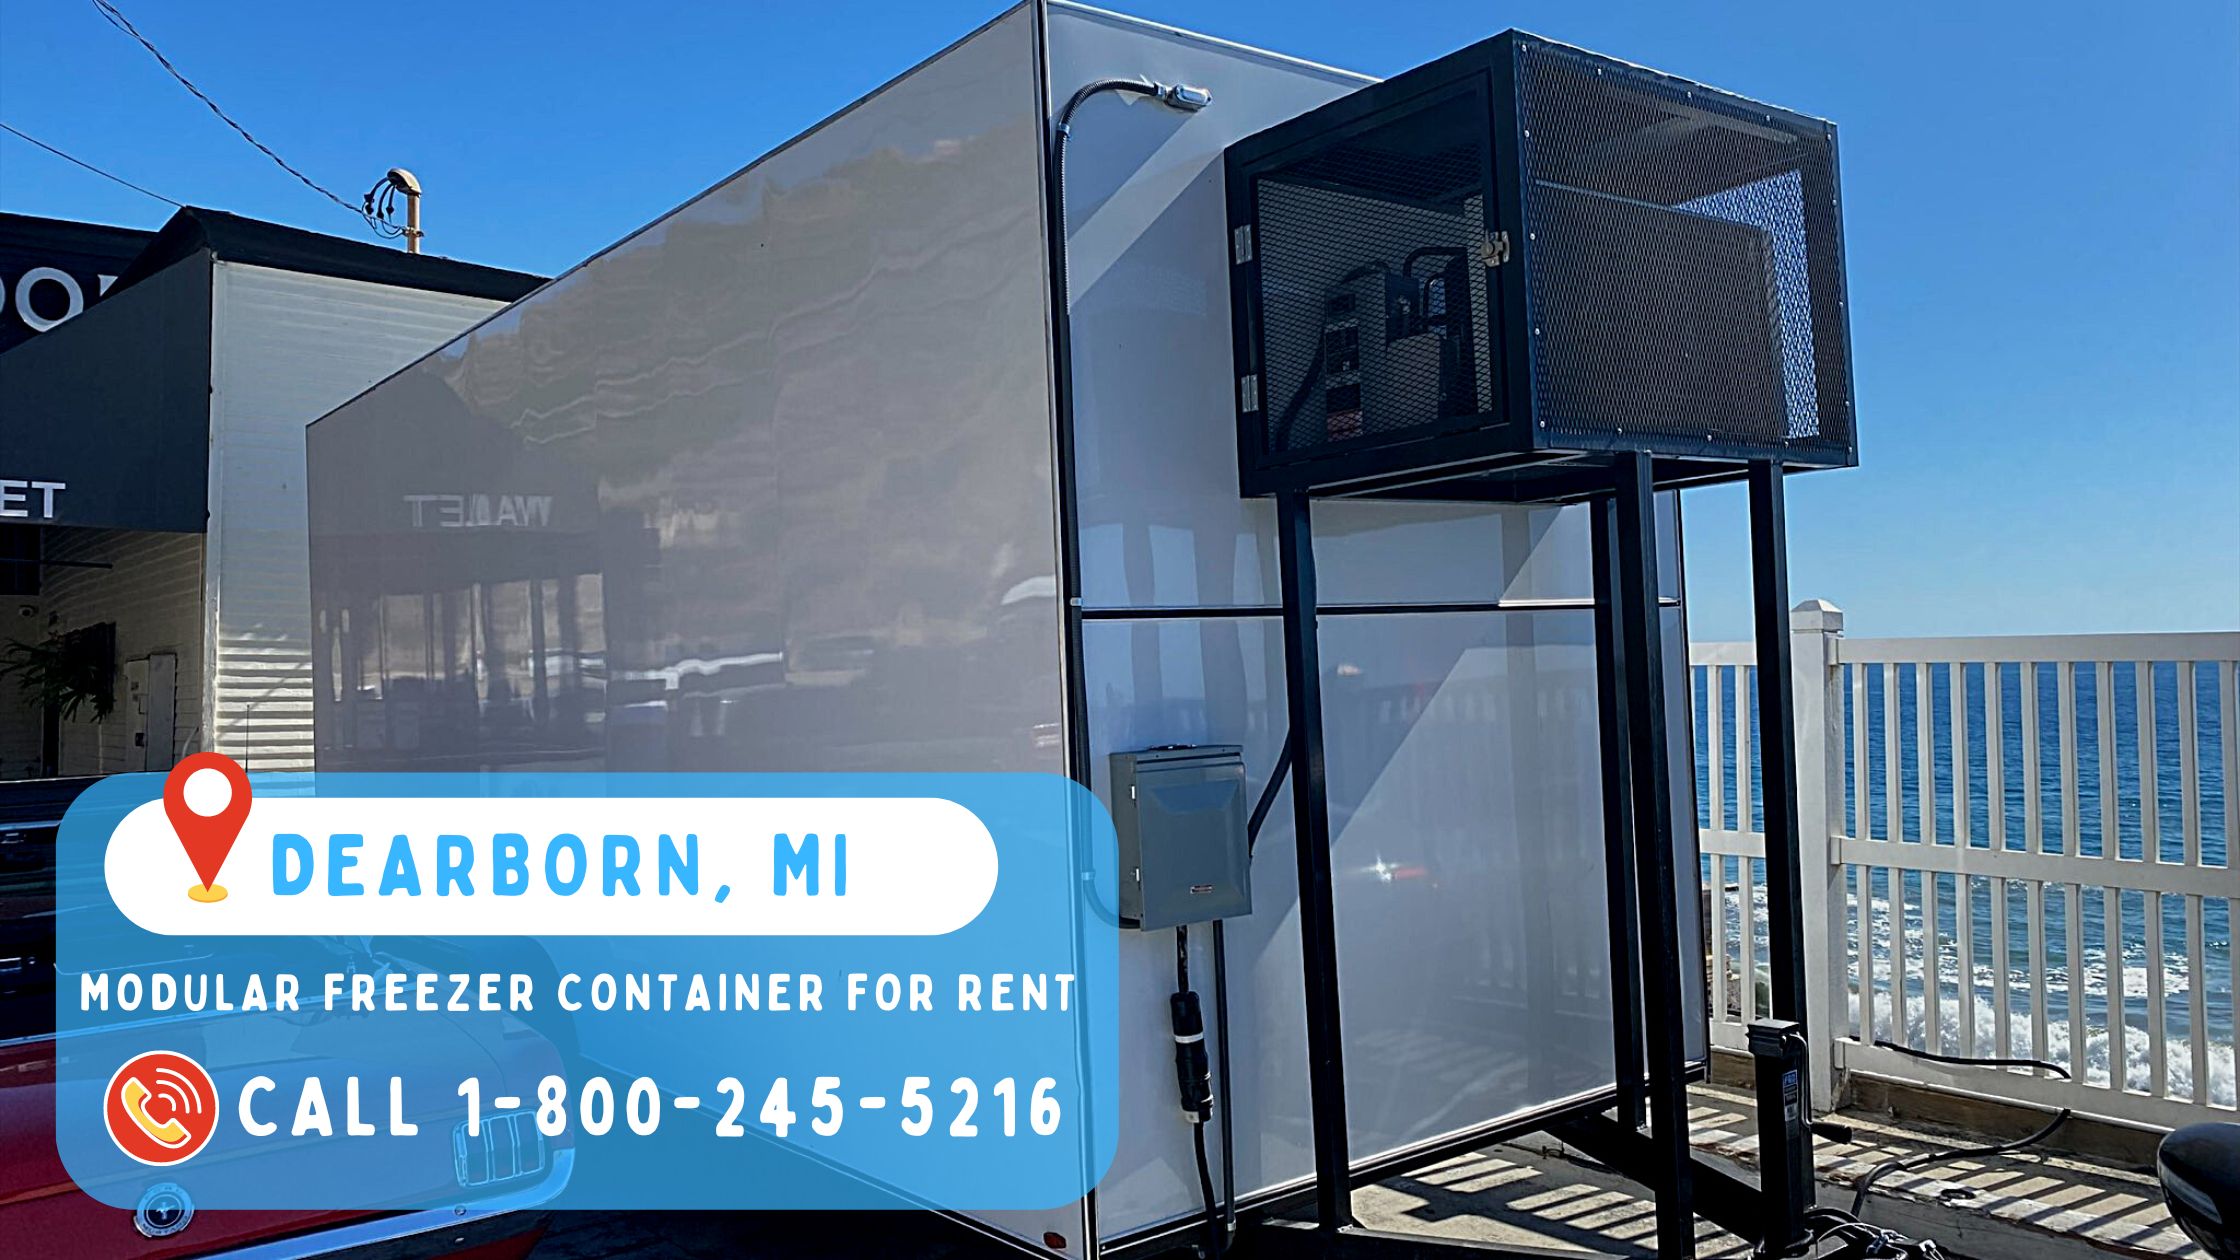 Modular freezer container for rent in Dearborn